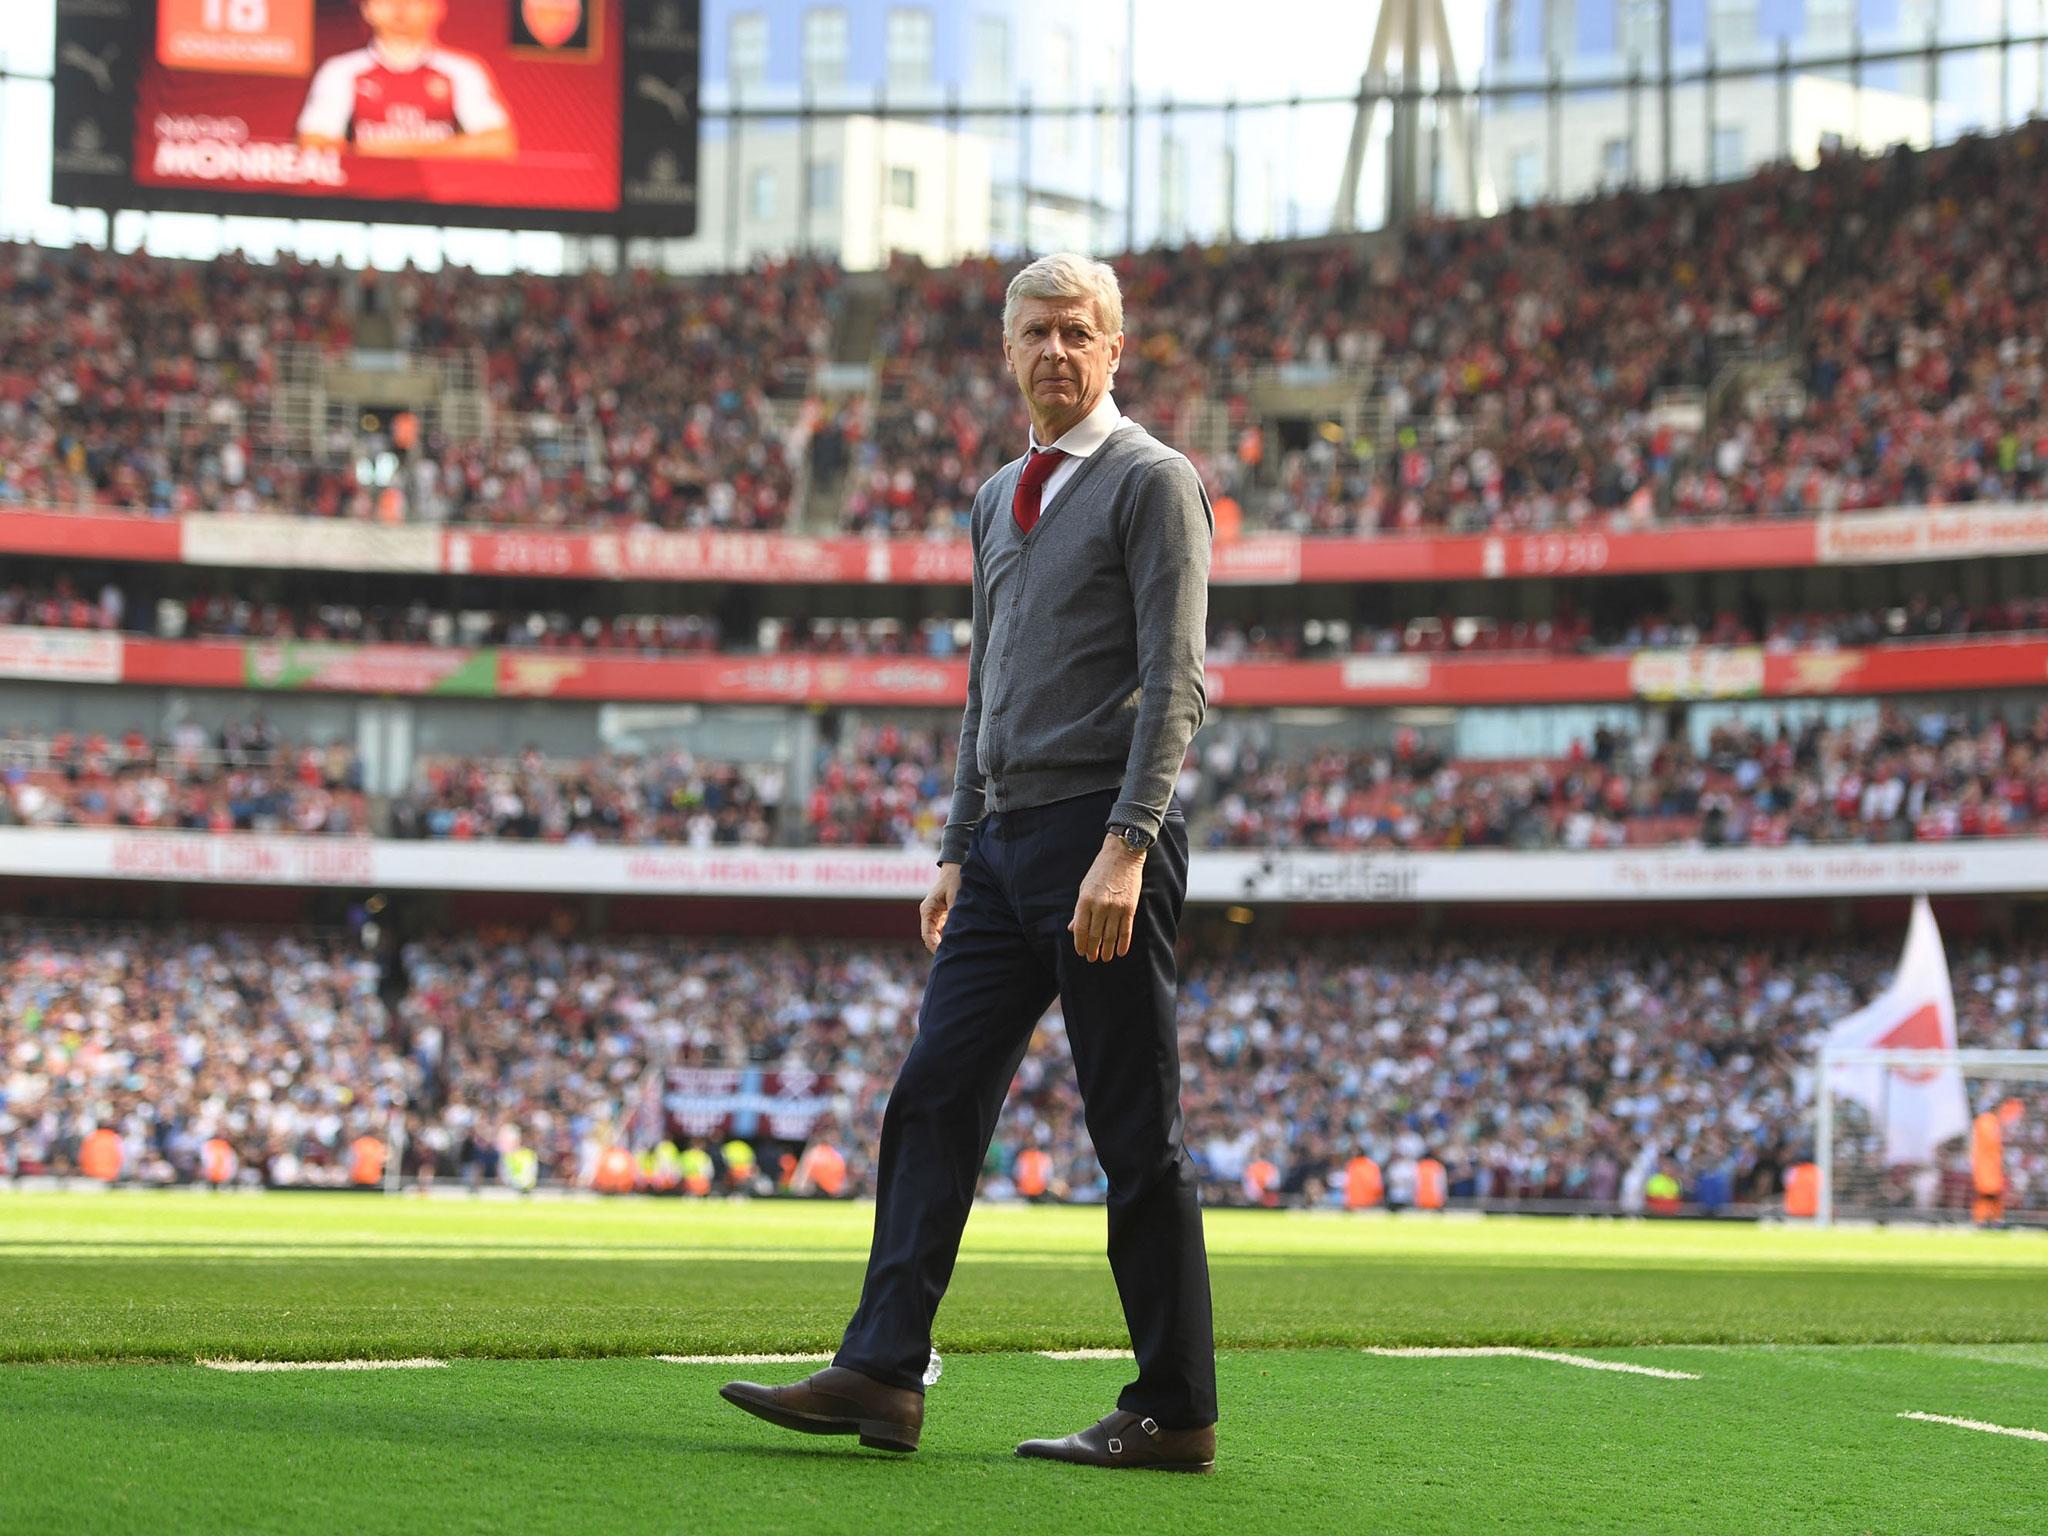 Wenger announced last week that he would be stepping down as Arsenal manager after almost 22 years at the club